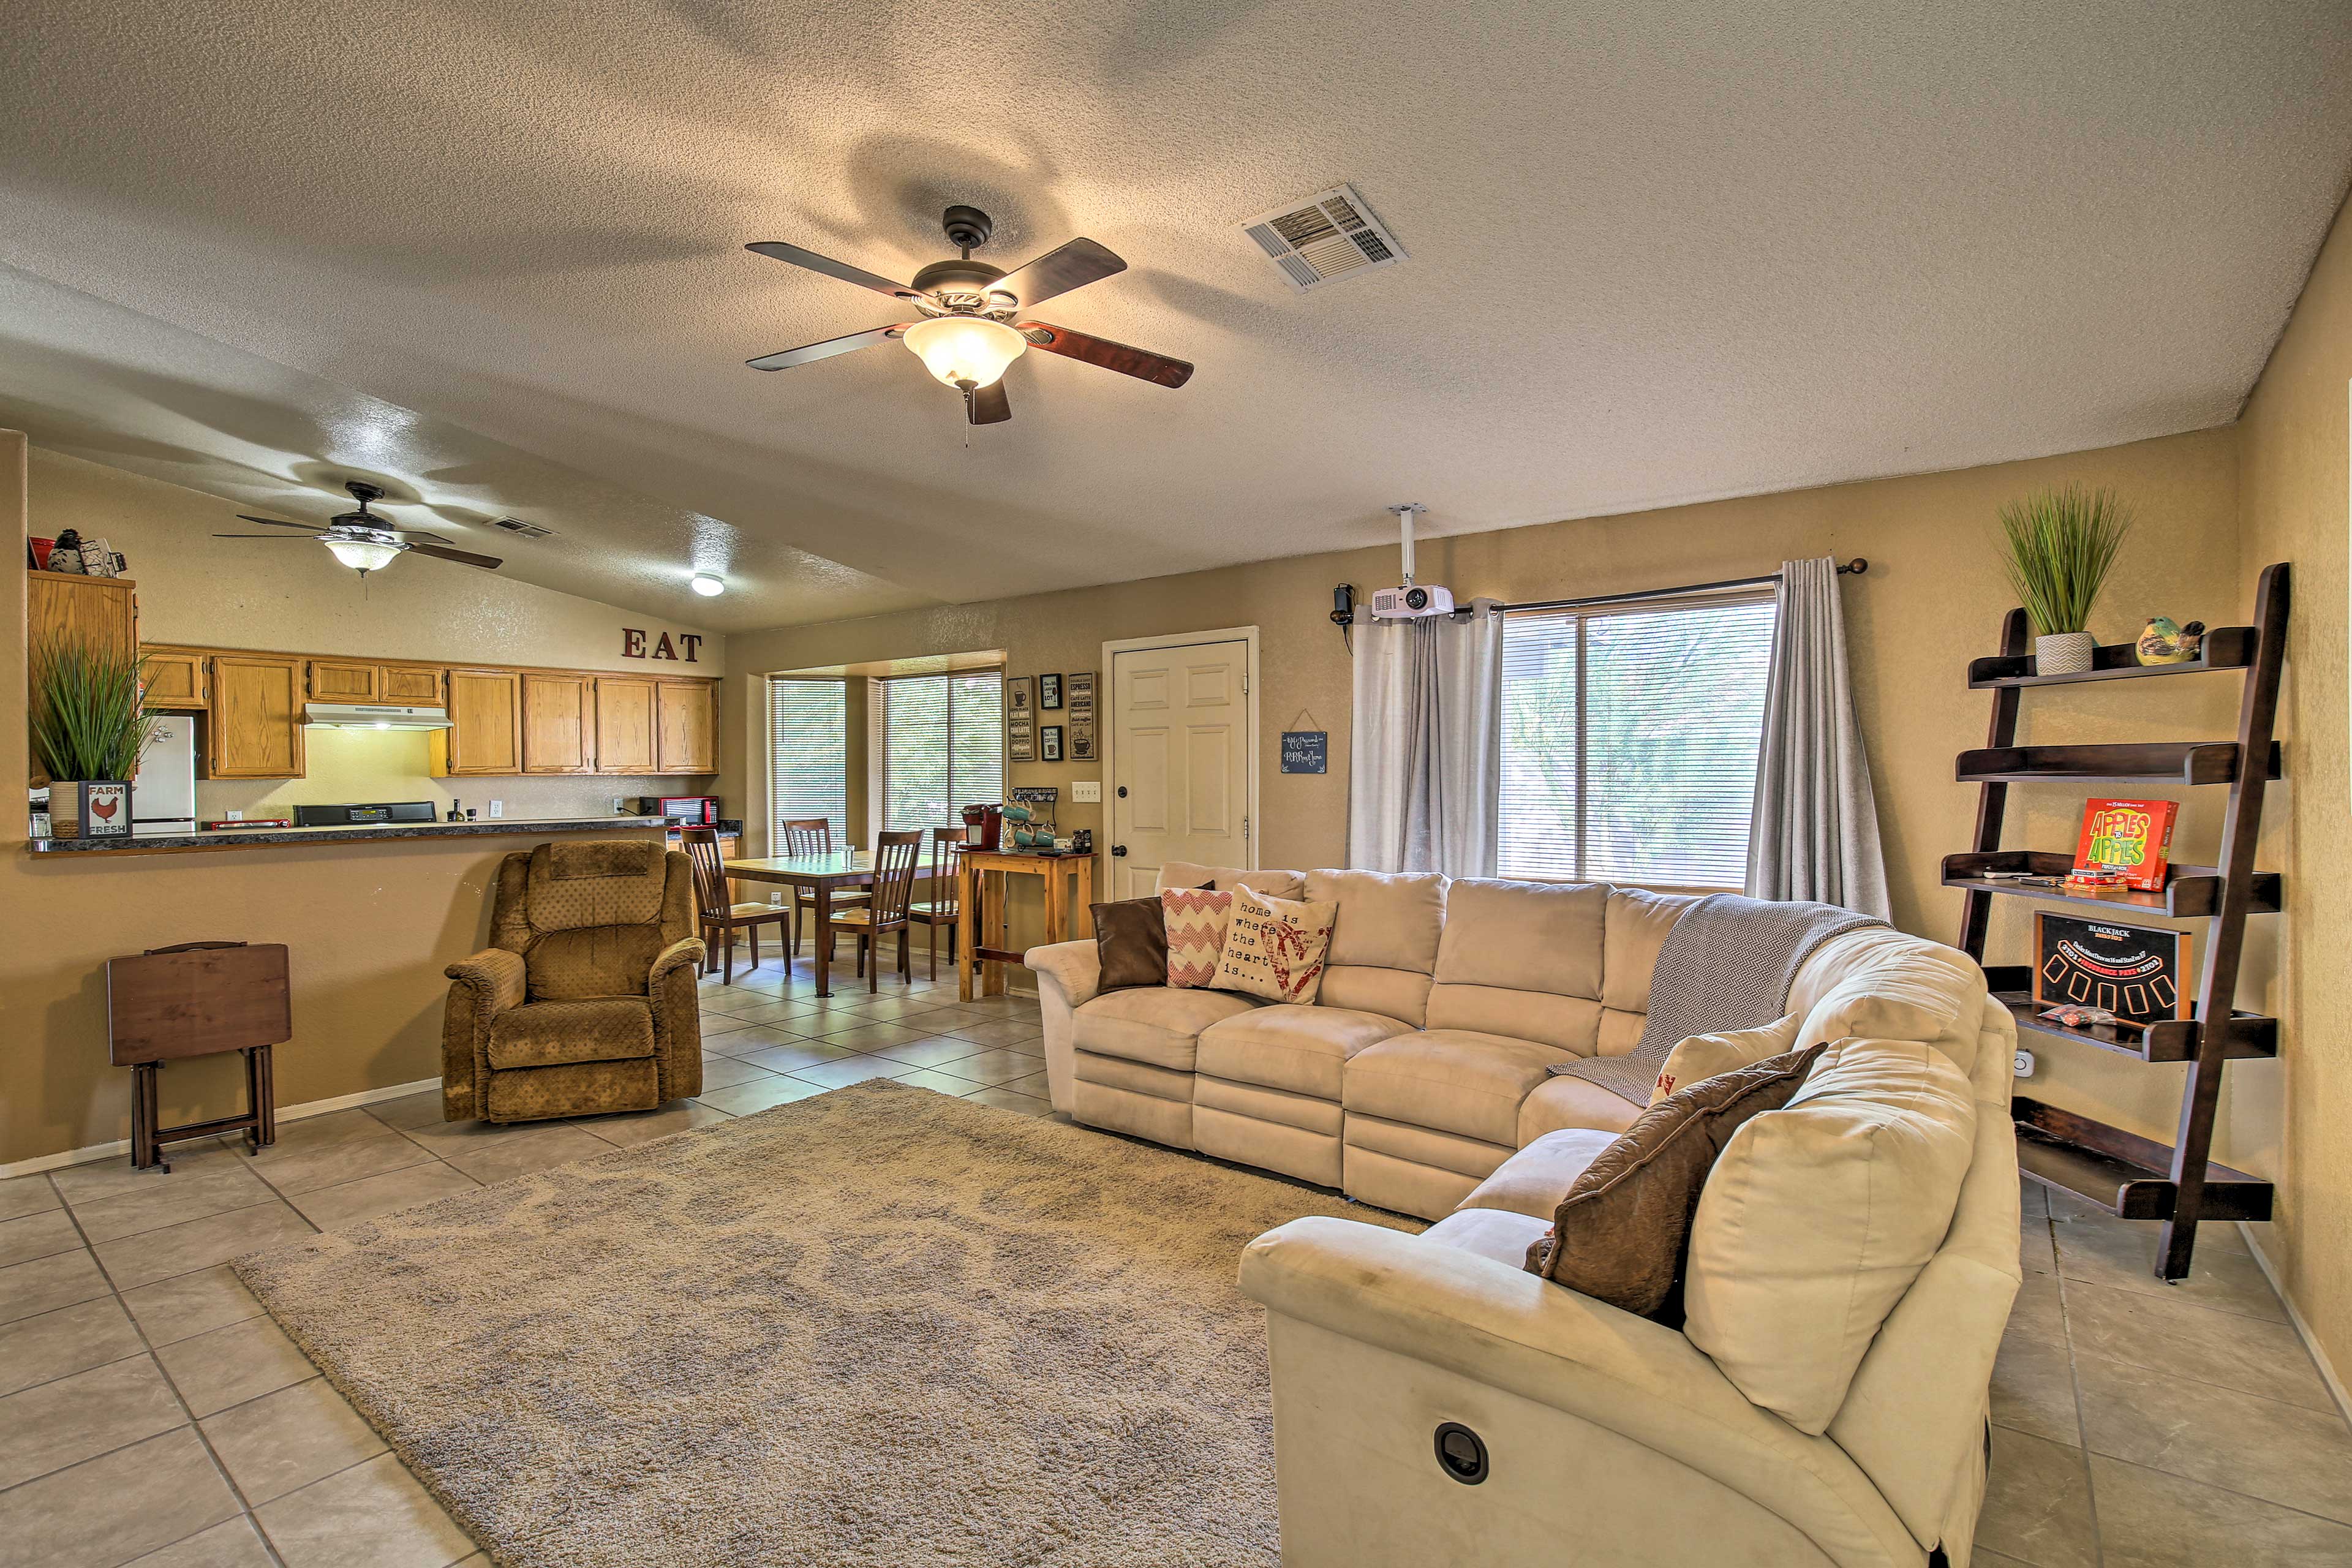 Unwind in the living area with the whole family.